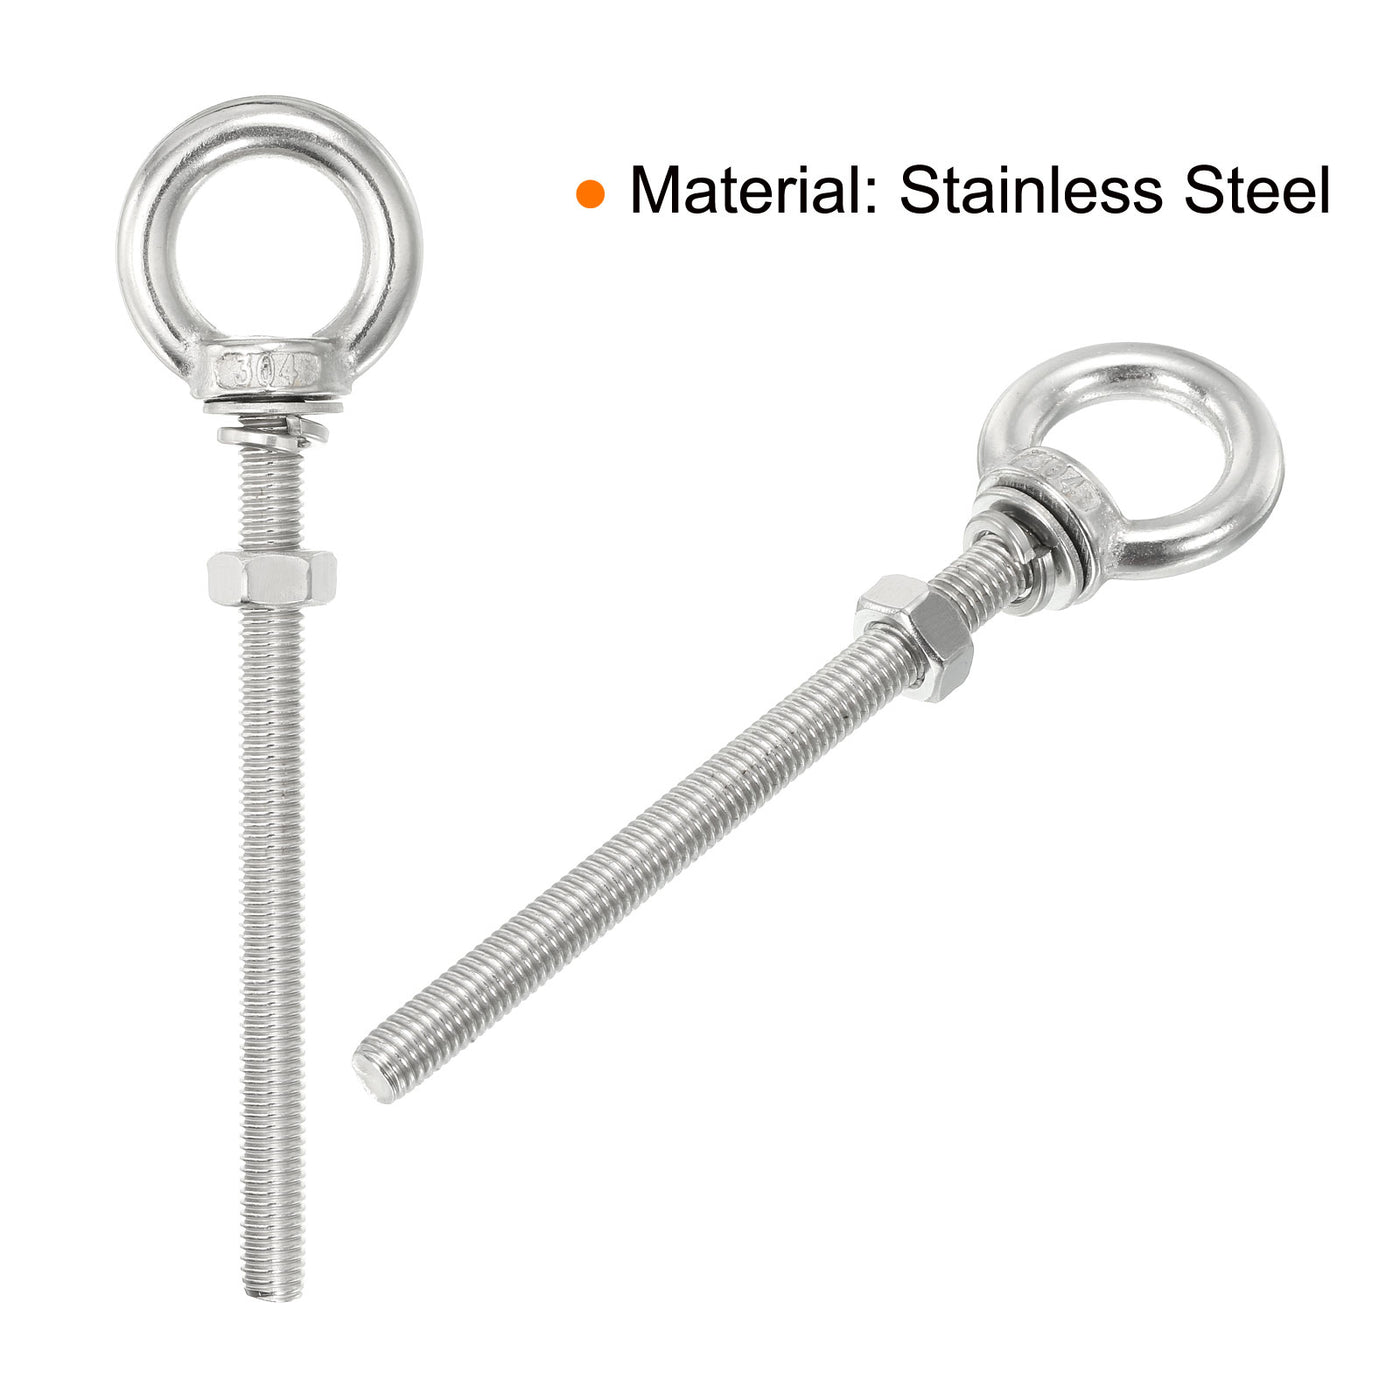 uxcell Uxcell M8x100 5/16"x4" Stainless Steel Eye Bolts Threaded Screw Eyebolt Shoulder Ring with Nuts Washers for Lifting Hanging, 4 Set